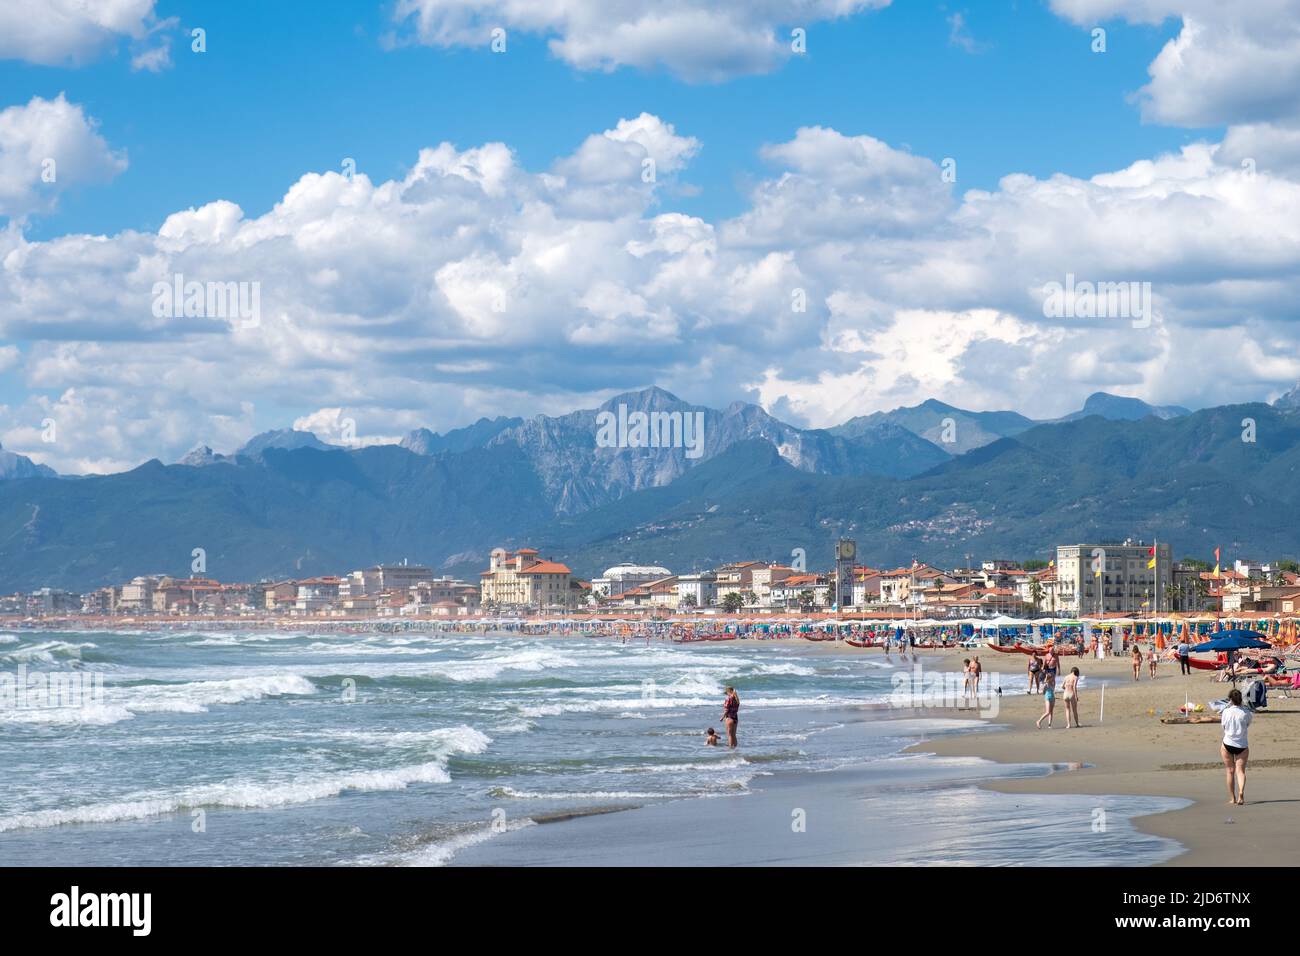 Viareggioi, Italy - June 9, 2022: Beachgoers, young and old, enjoy the surf at Viareggio, Italy. Majestic Apennine mountains and dramatic clouds frame Stock Photo